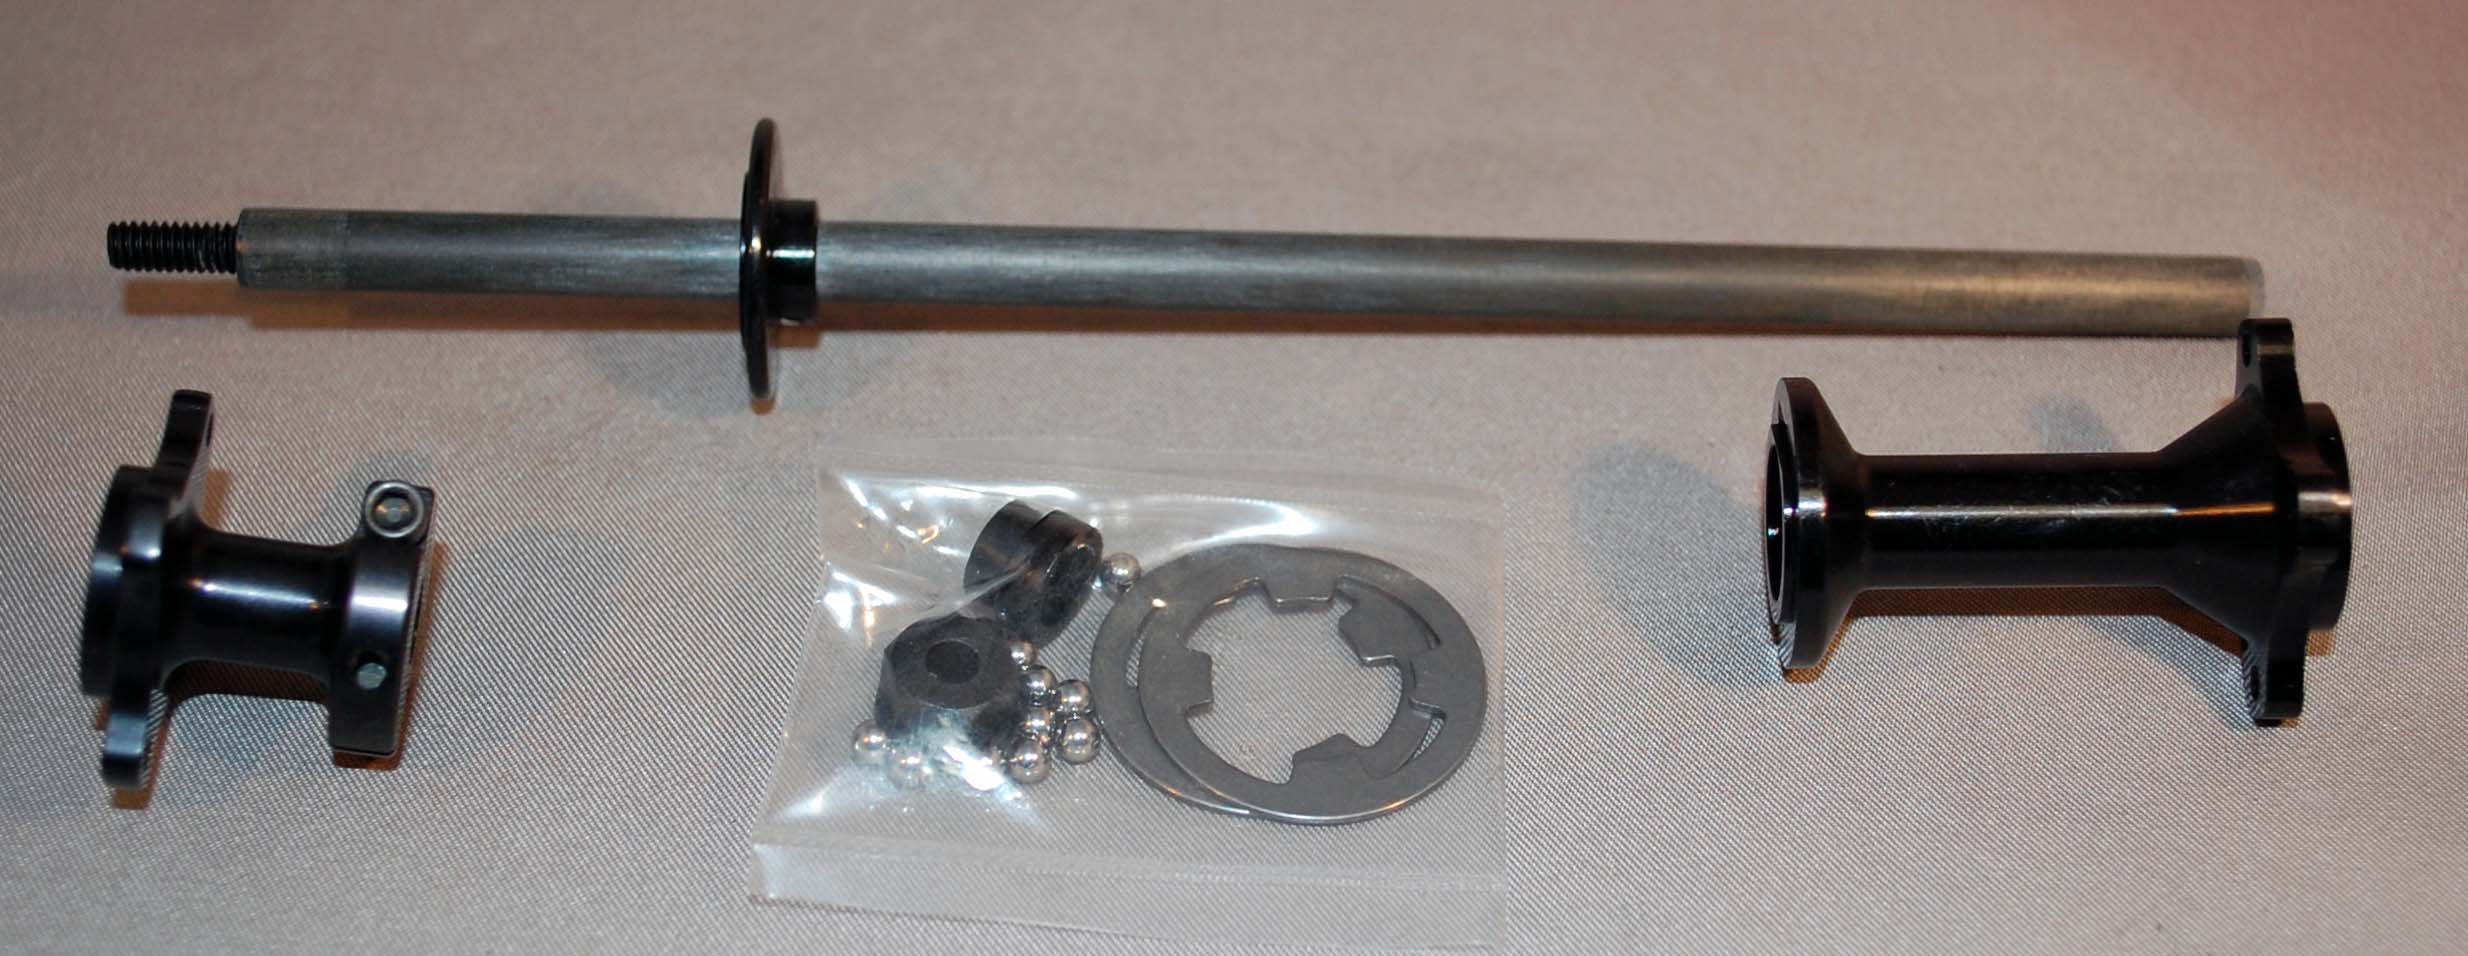 1/10th Associated Style Axle Kit For 235mm Wide On Road Cars(Black)